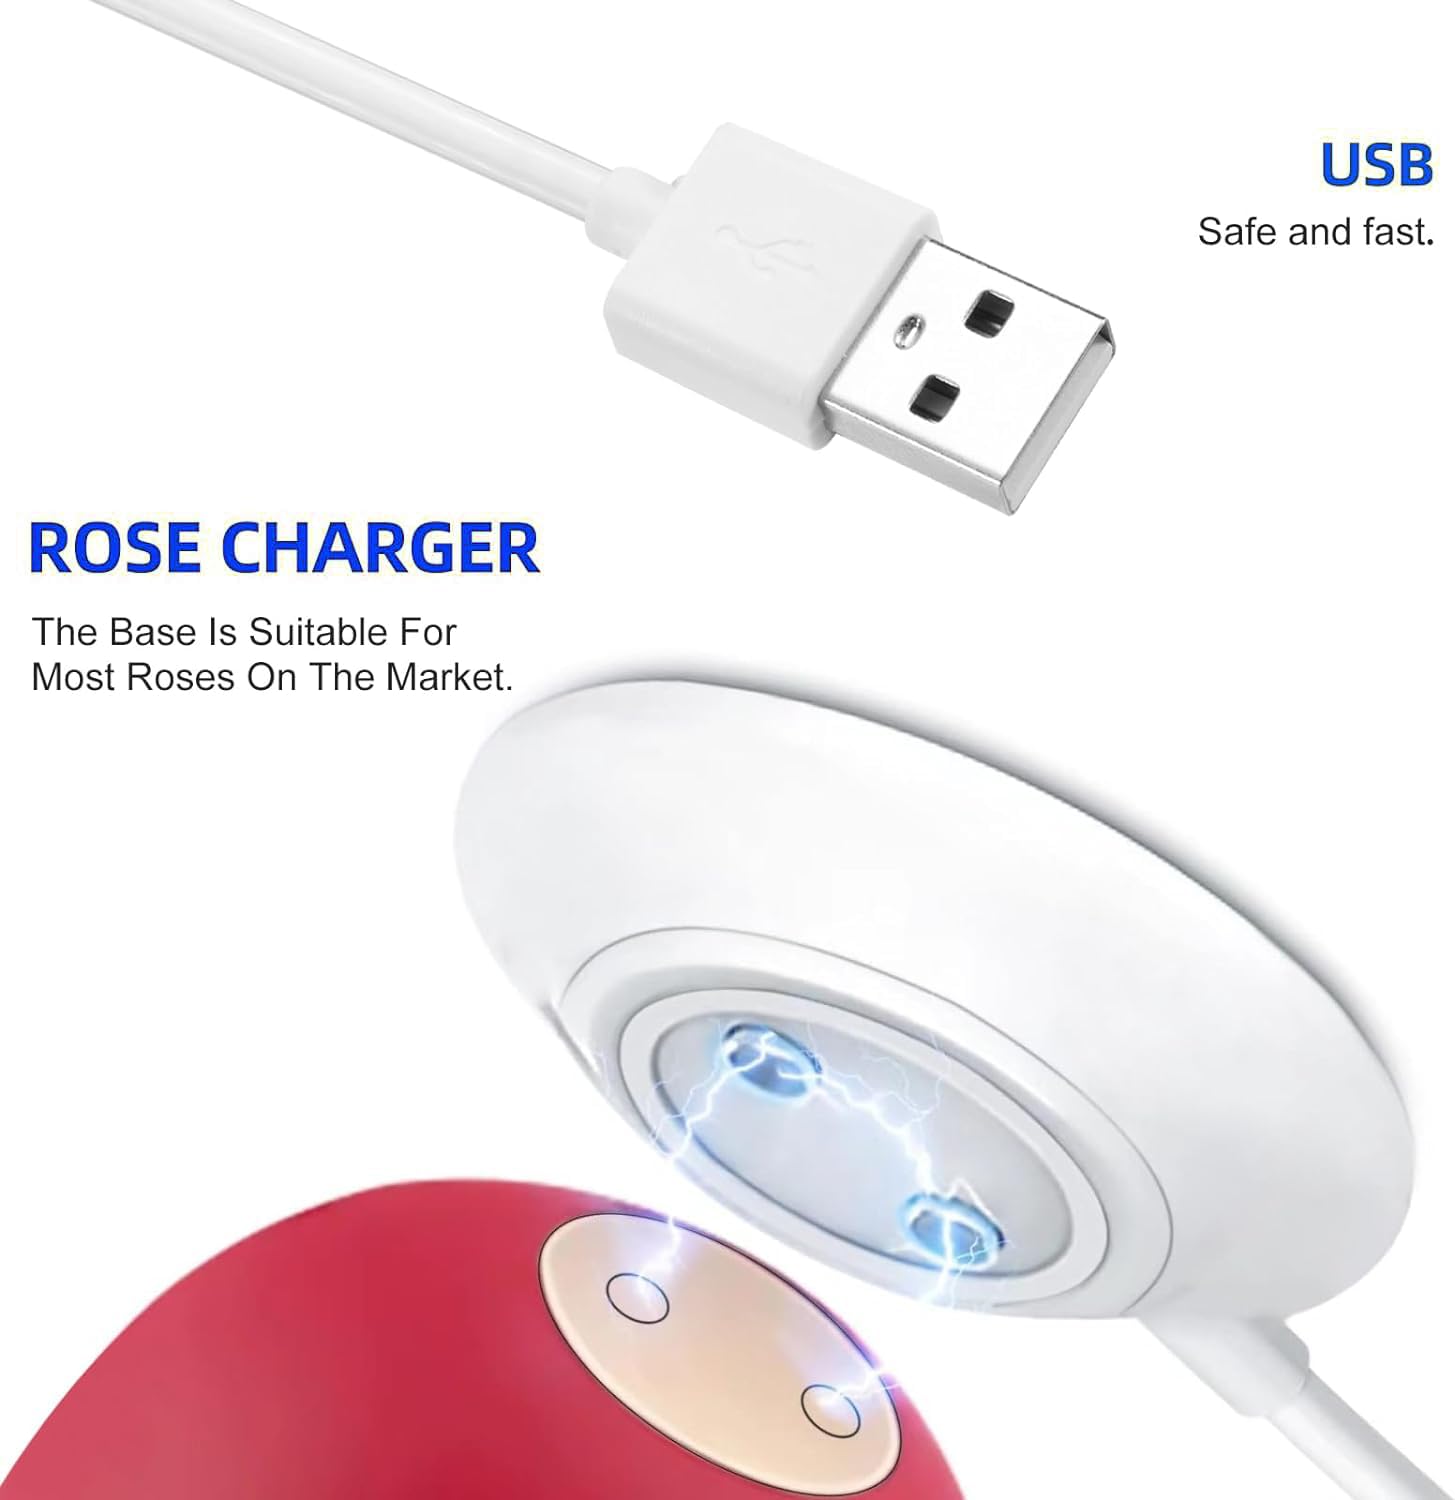 Only-12mm Magnetic USB Charger Adapter Cable Cord Fast Charging Dock Station, Compatible Rose Charger Base Dock Station for Rose, 2.4Ft, 2pack